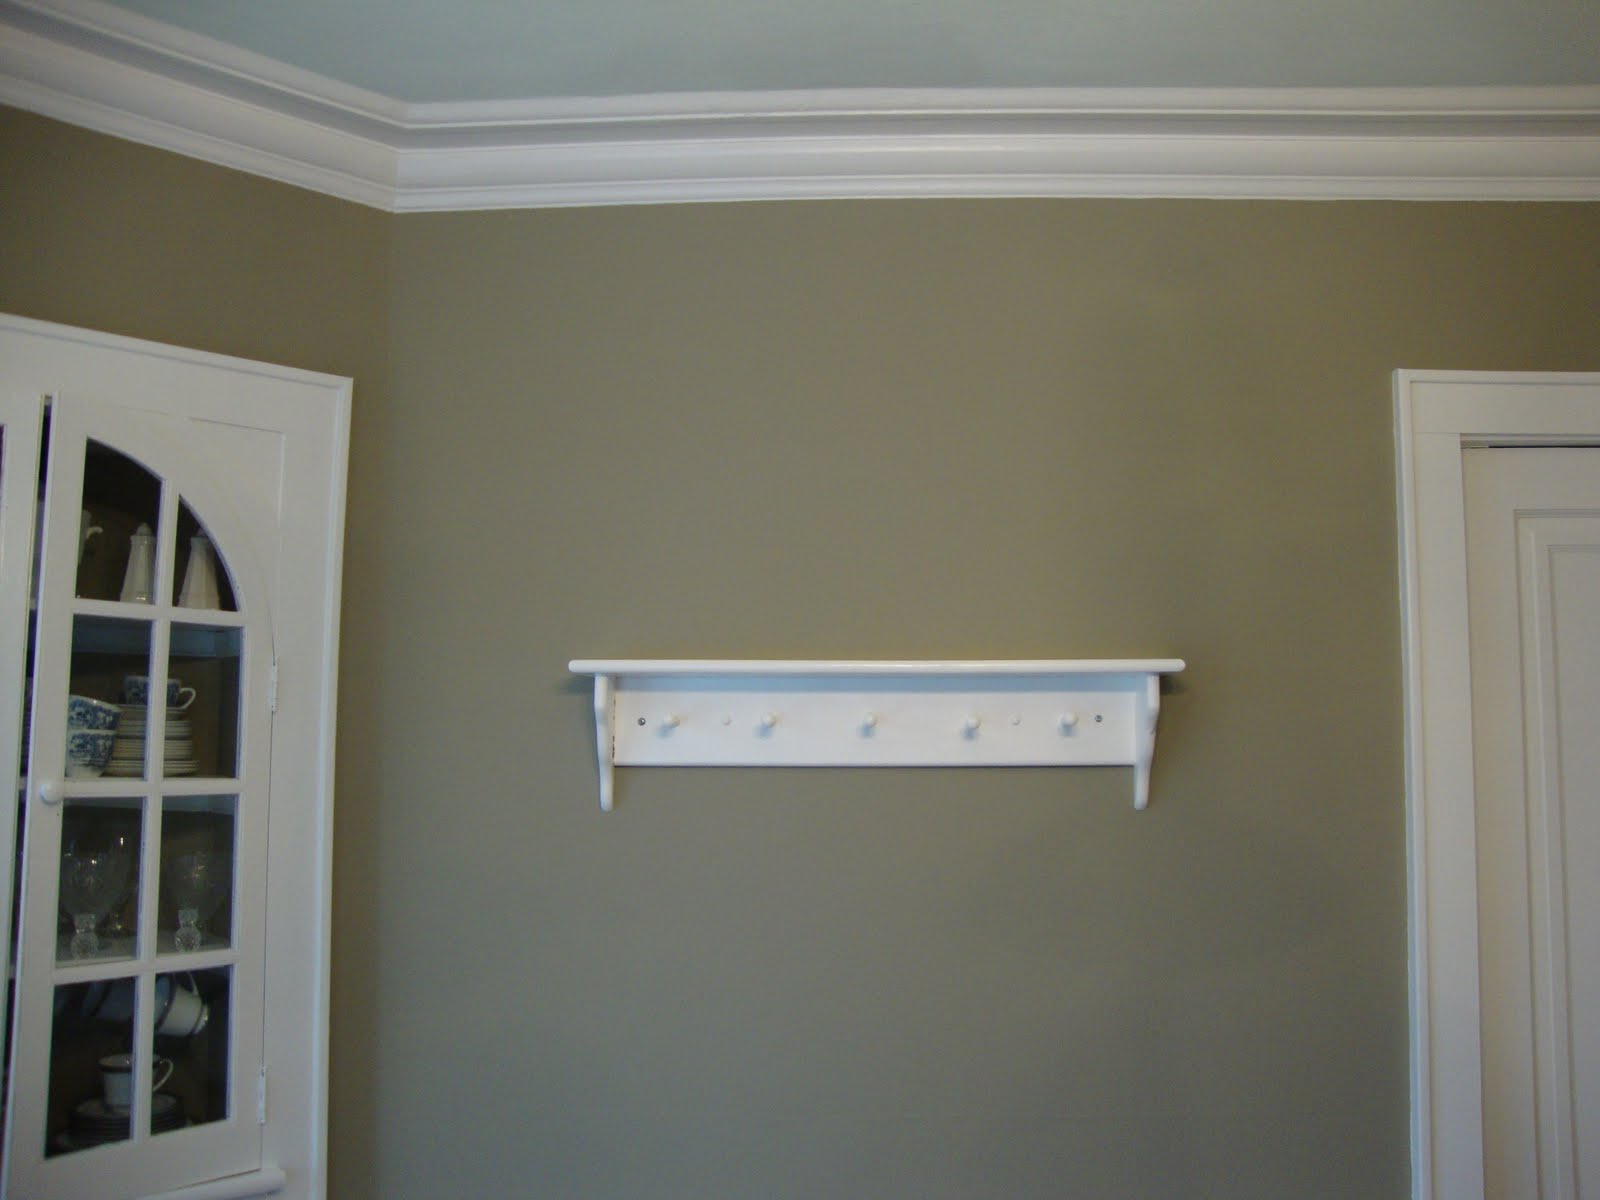 paint color schemes Dining Room Decor: Wall #1